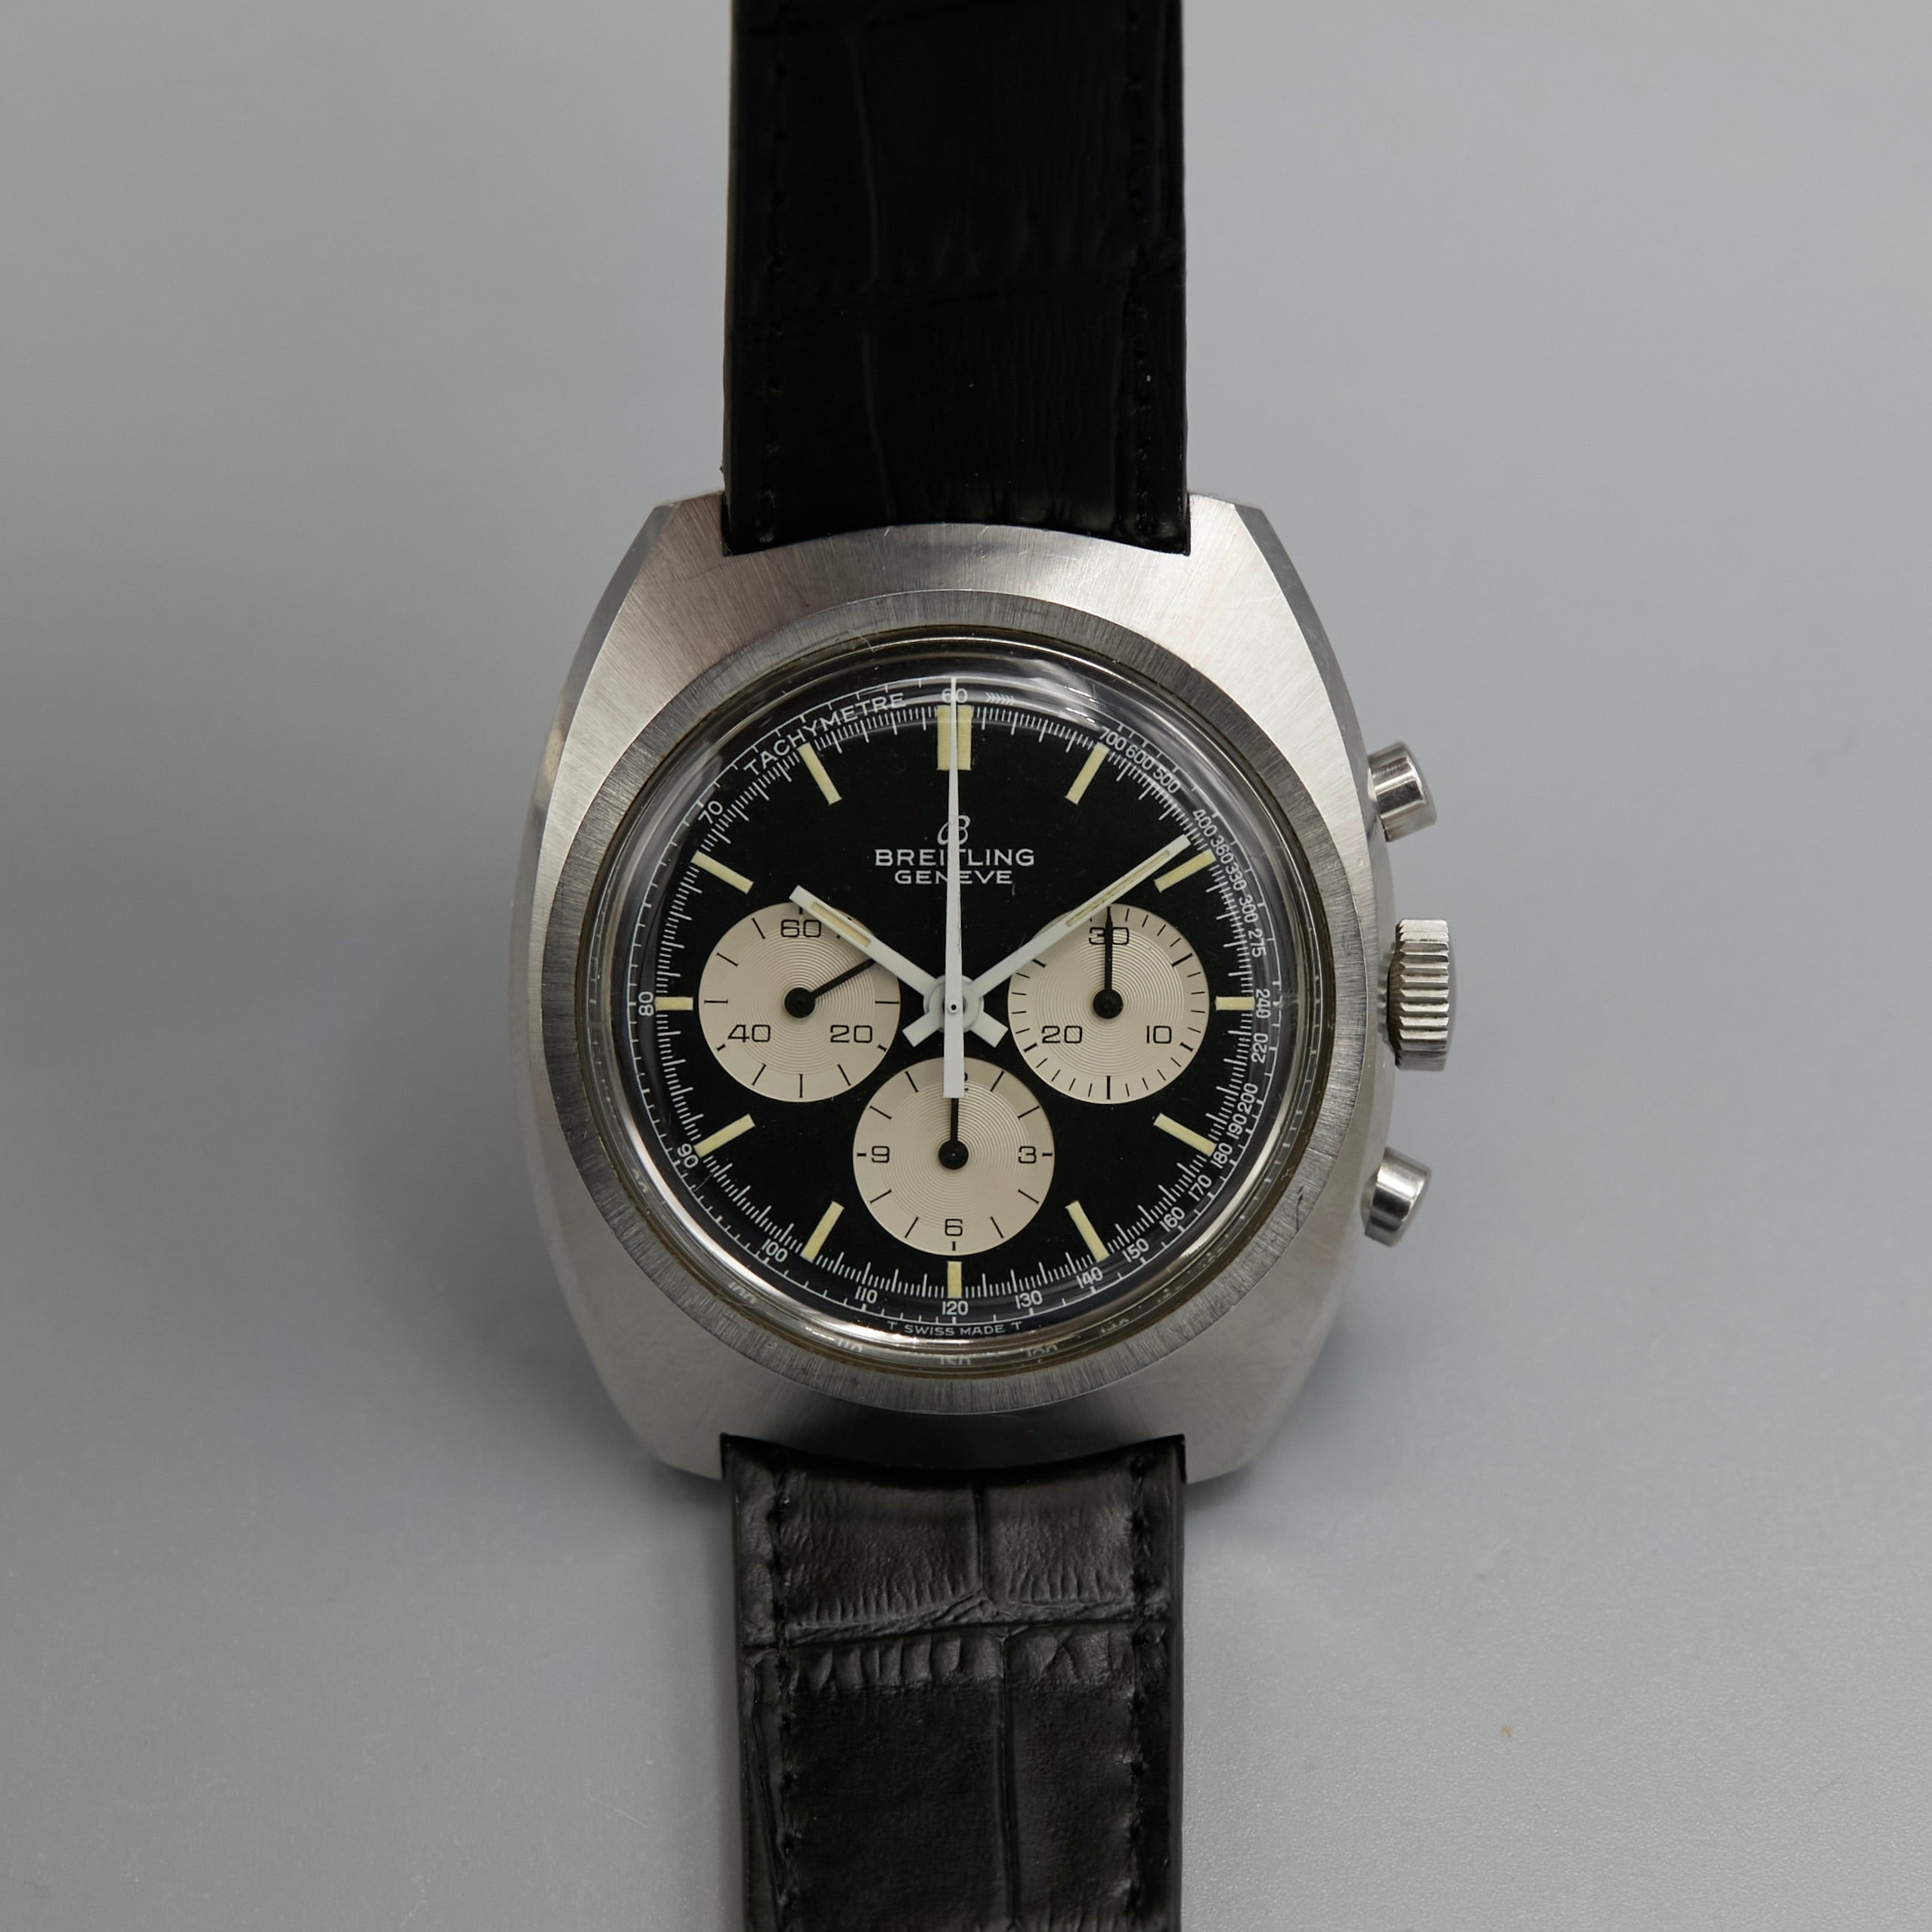 Vintage Breitling Chronograph Manual Wind Panda Dial Watch - 9657